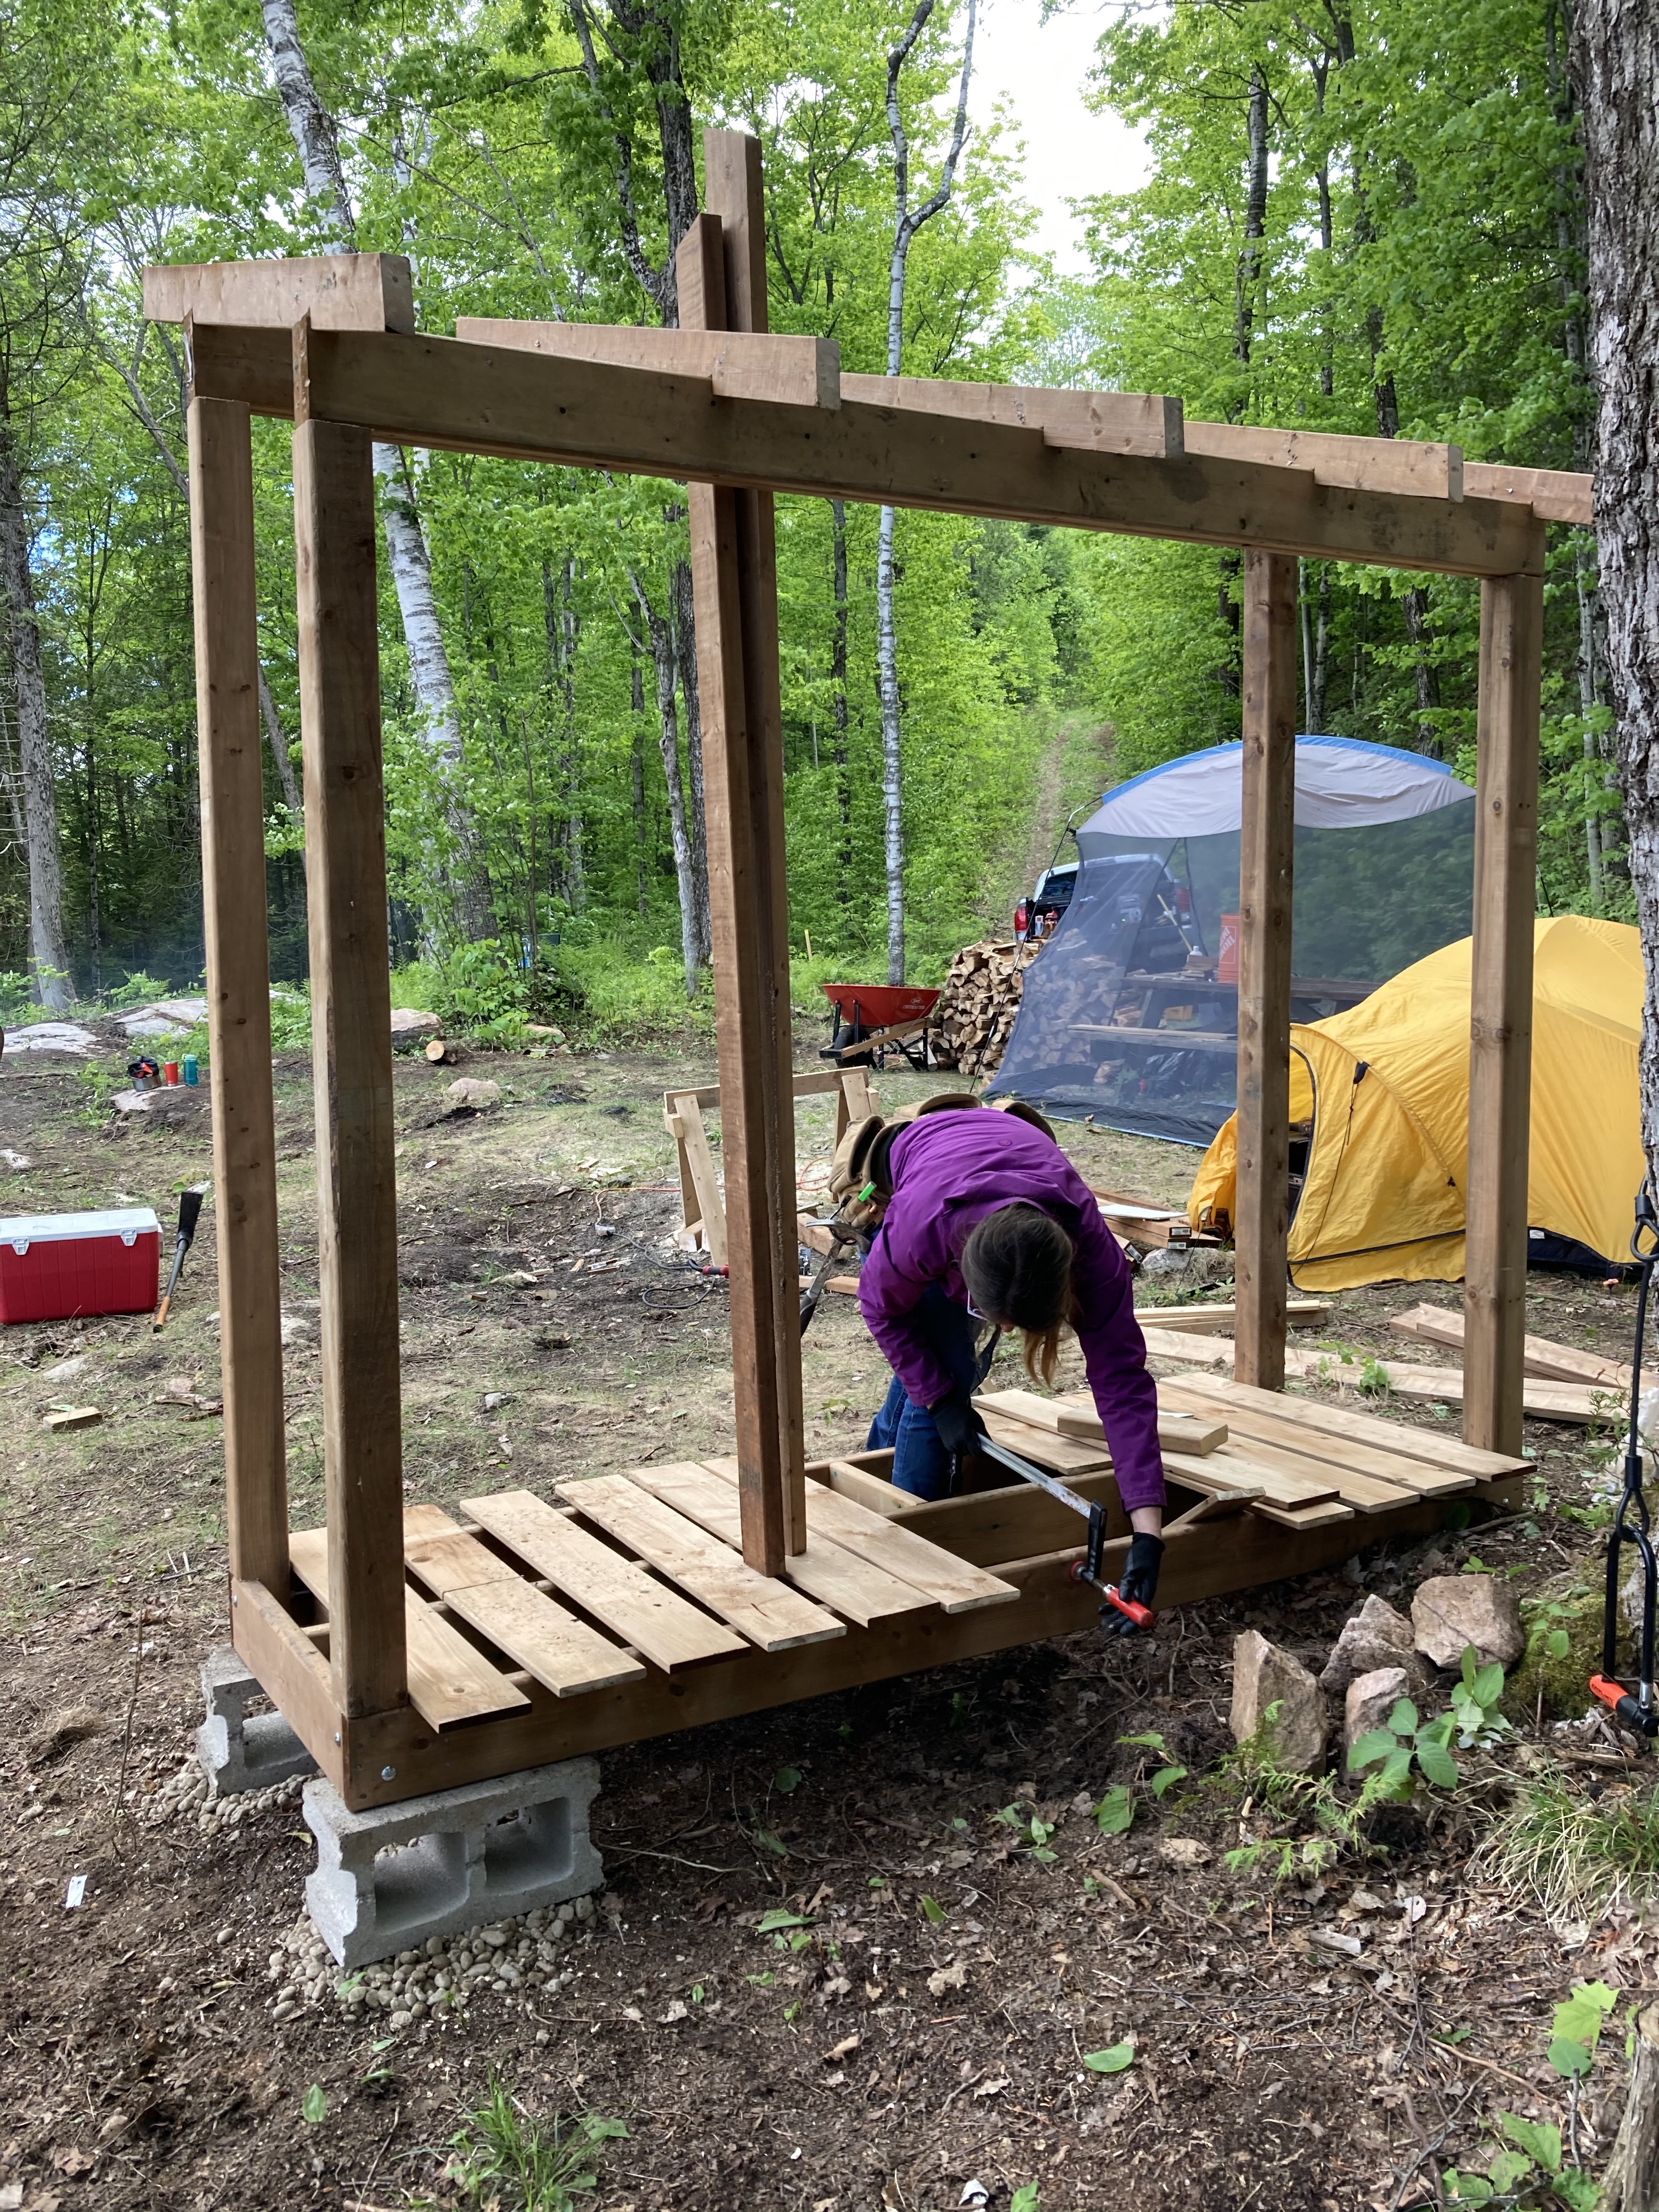 The firewood storage shed in construction. It is 8 feet wide, 3 feet deep, and about 7 feet tall and has a single-pitch roof. It is divided into two halves and is completely open to the air.